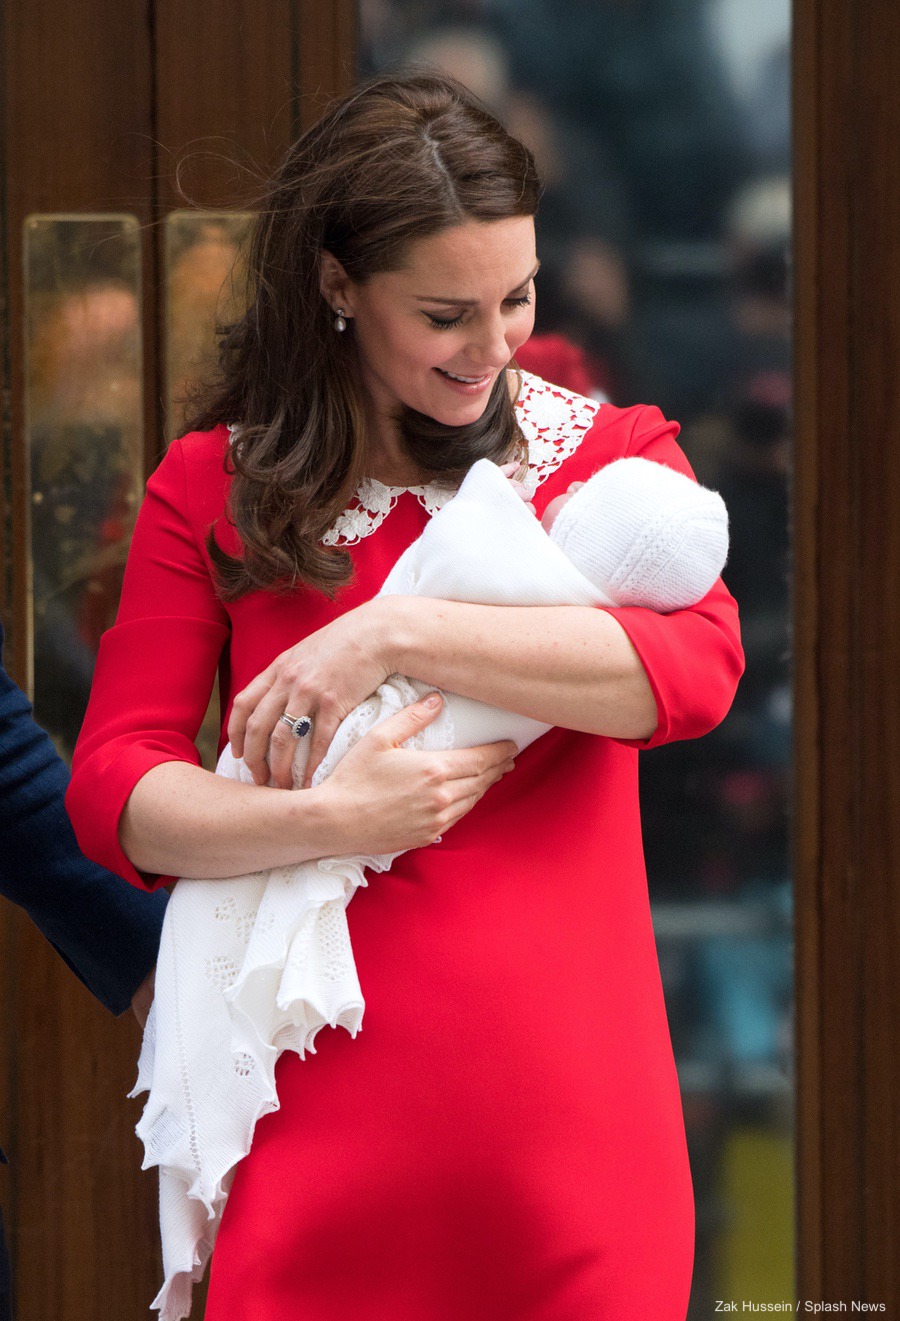 Baby Cambridge! The new royal baby is the heaviest born in 100 years! Kate cradles the newborn whilst wearing a red dress.